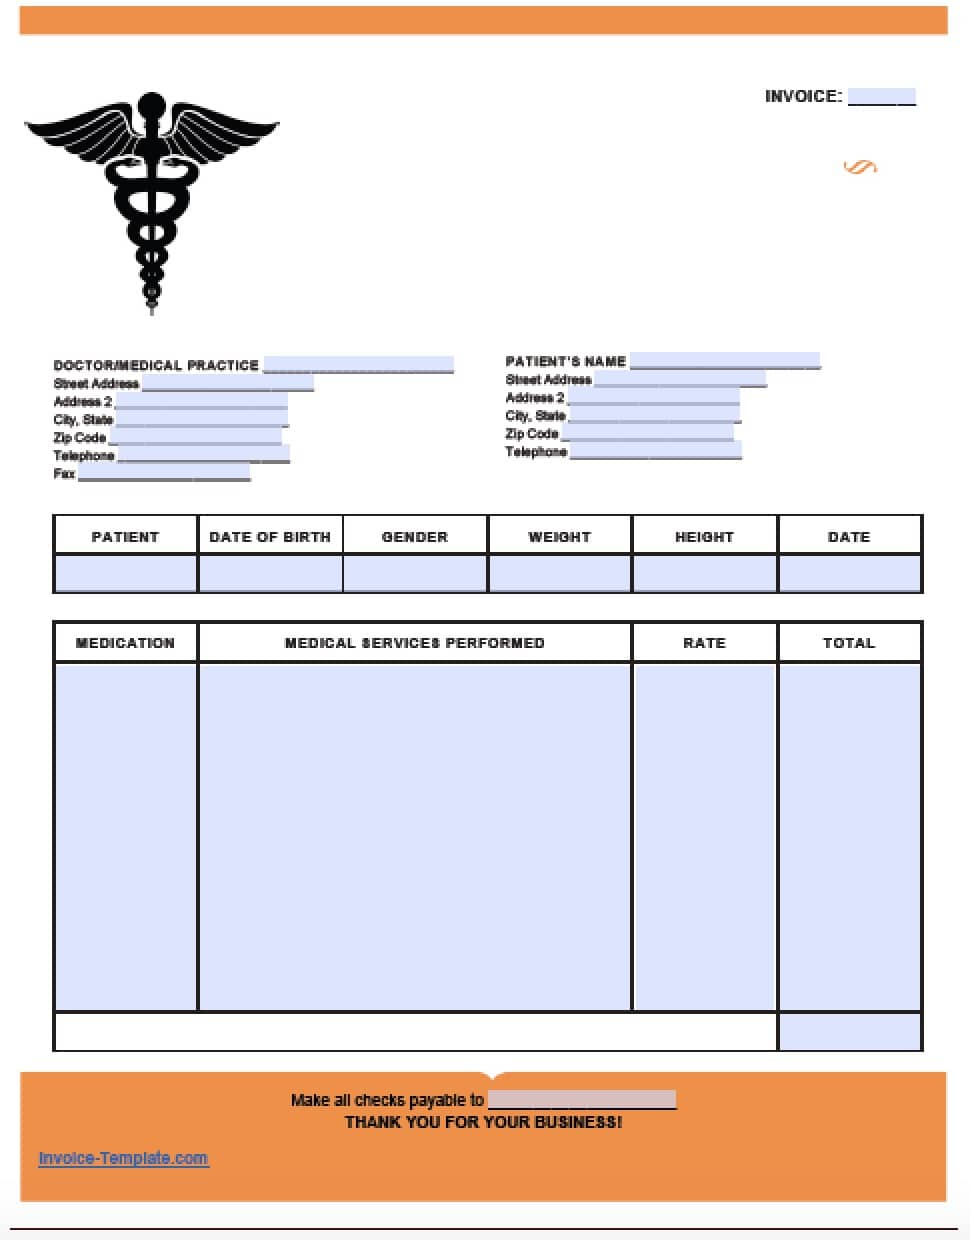 Free Medical Invoice Template | Excel | Pdf | Word (.doc) Within Medical Invoice Template